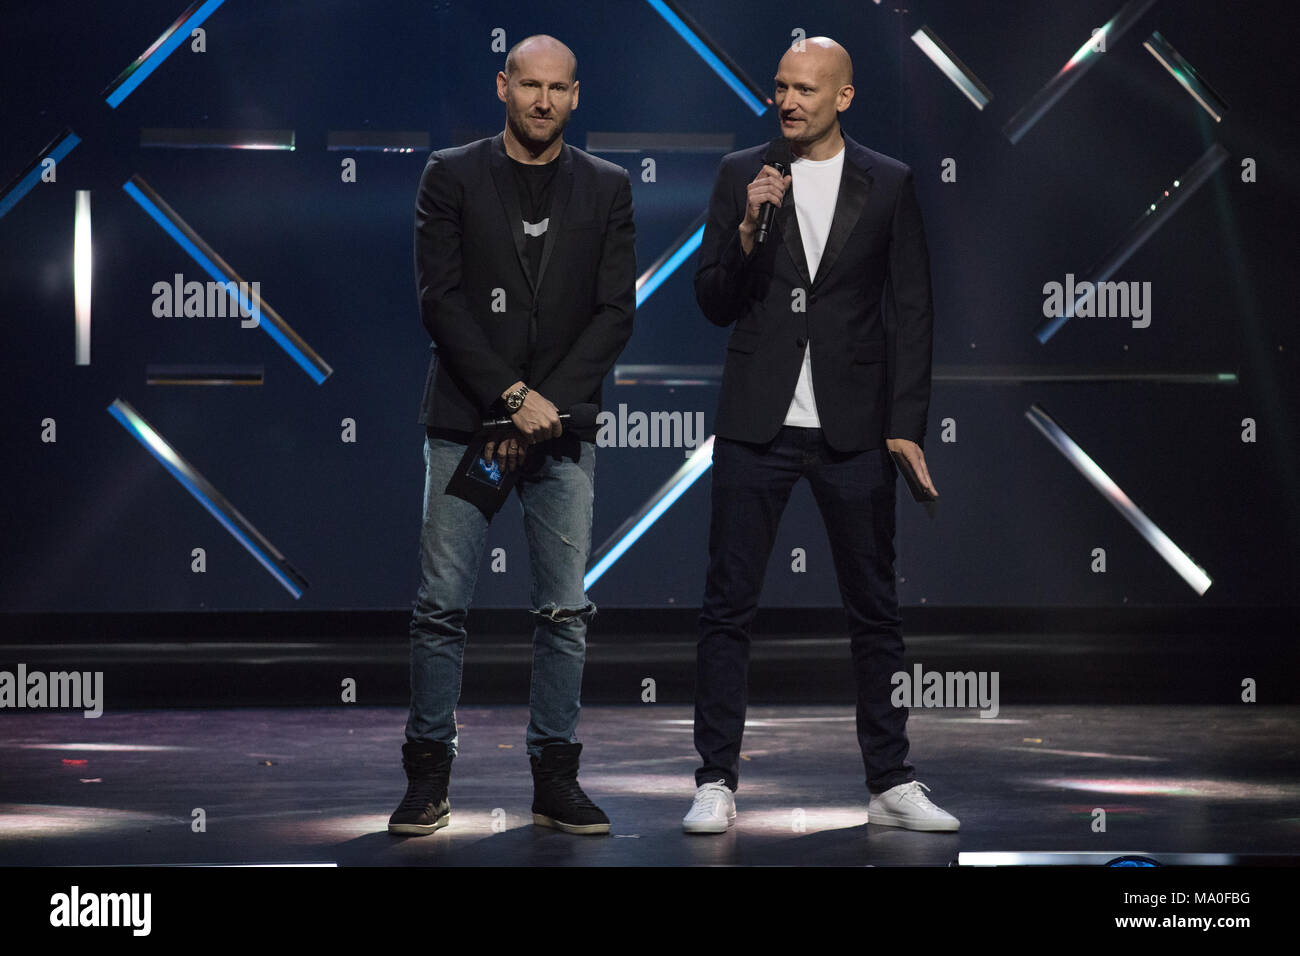 Norway, Oslo - February 25, 2018. The Norwegian producer duo Stargate present an award during the Norwegian Grammy Awards, Spellemannprisen 2017, at Oslo Konserthus in Oslo. (Photo credit: Gonzales Photo - Stian S. Moller). Stock Photo